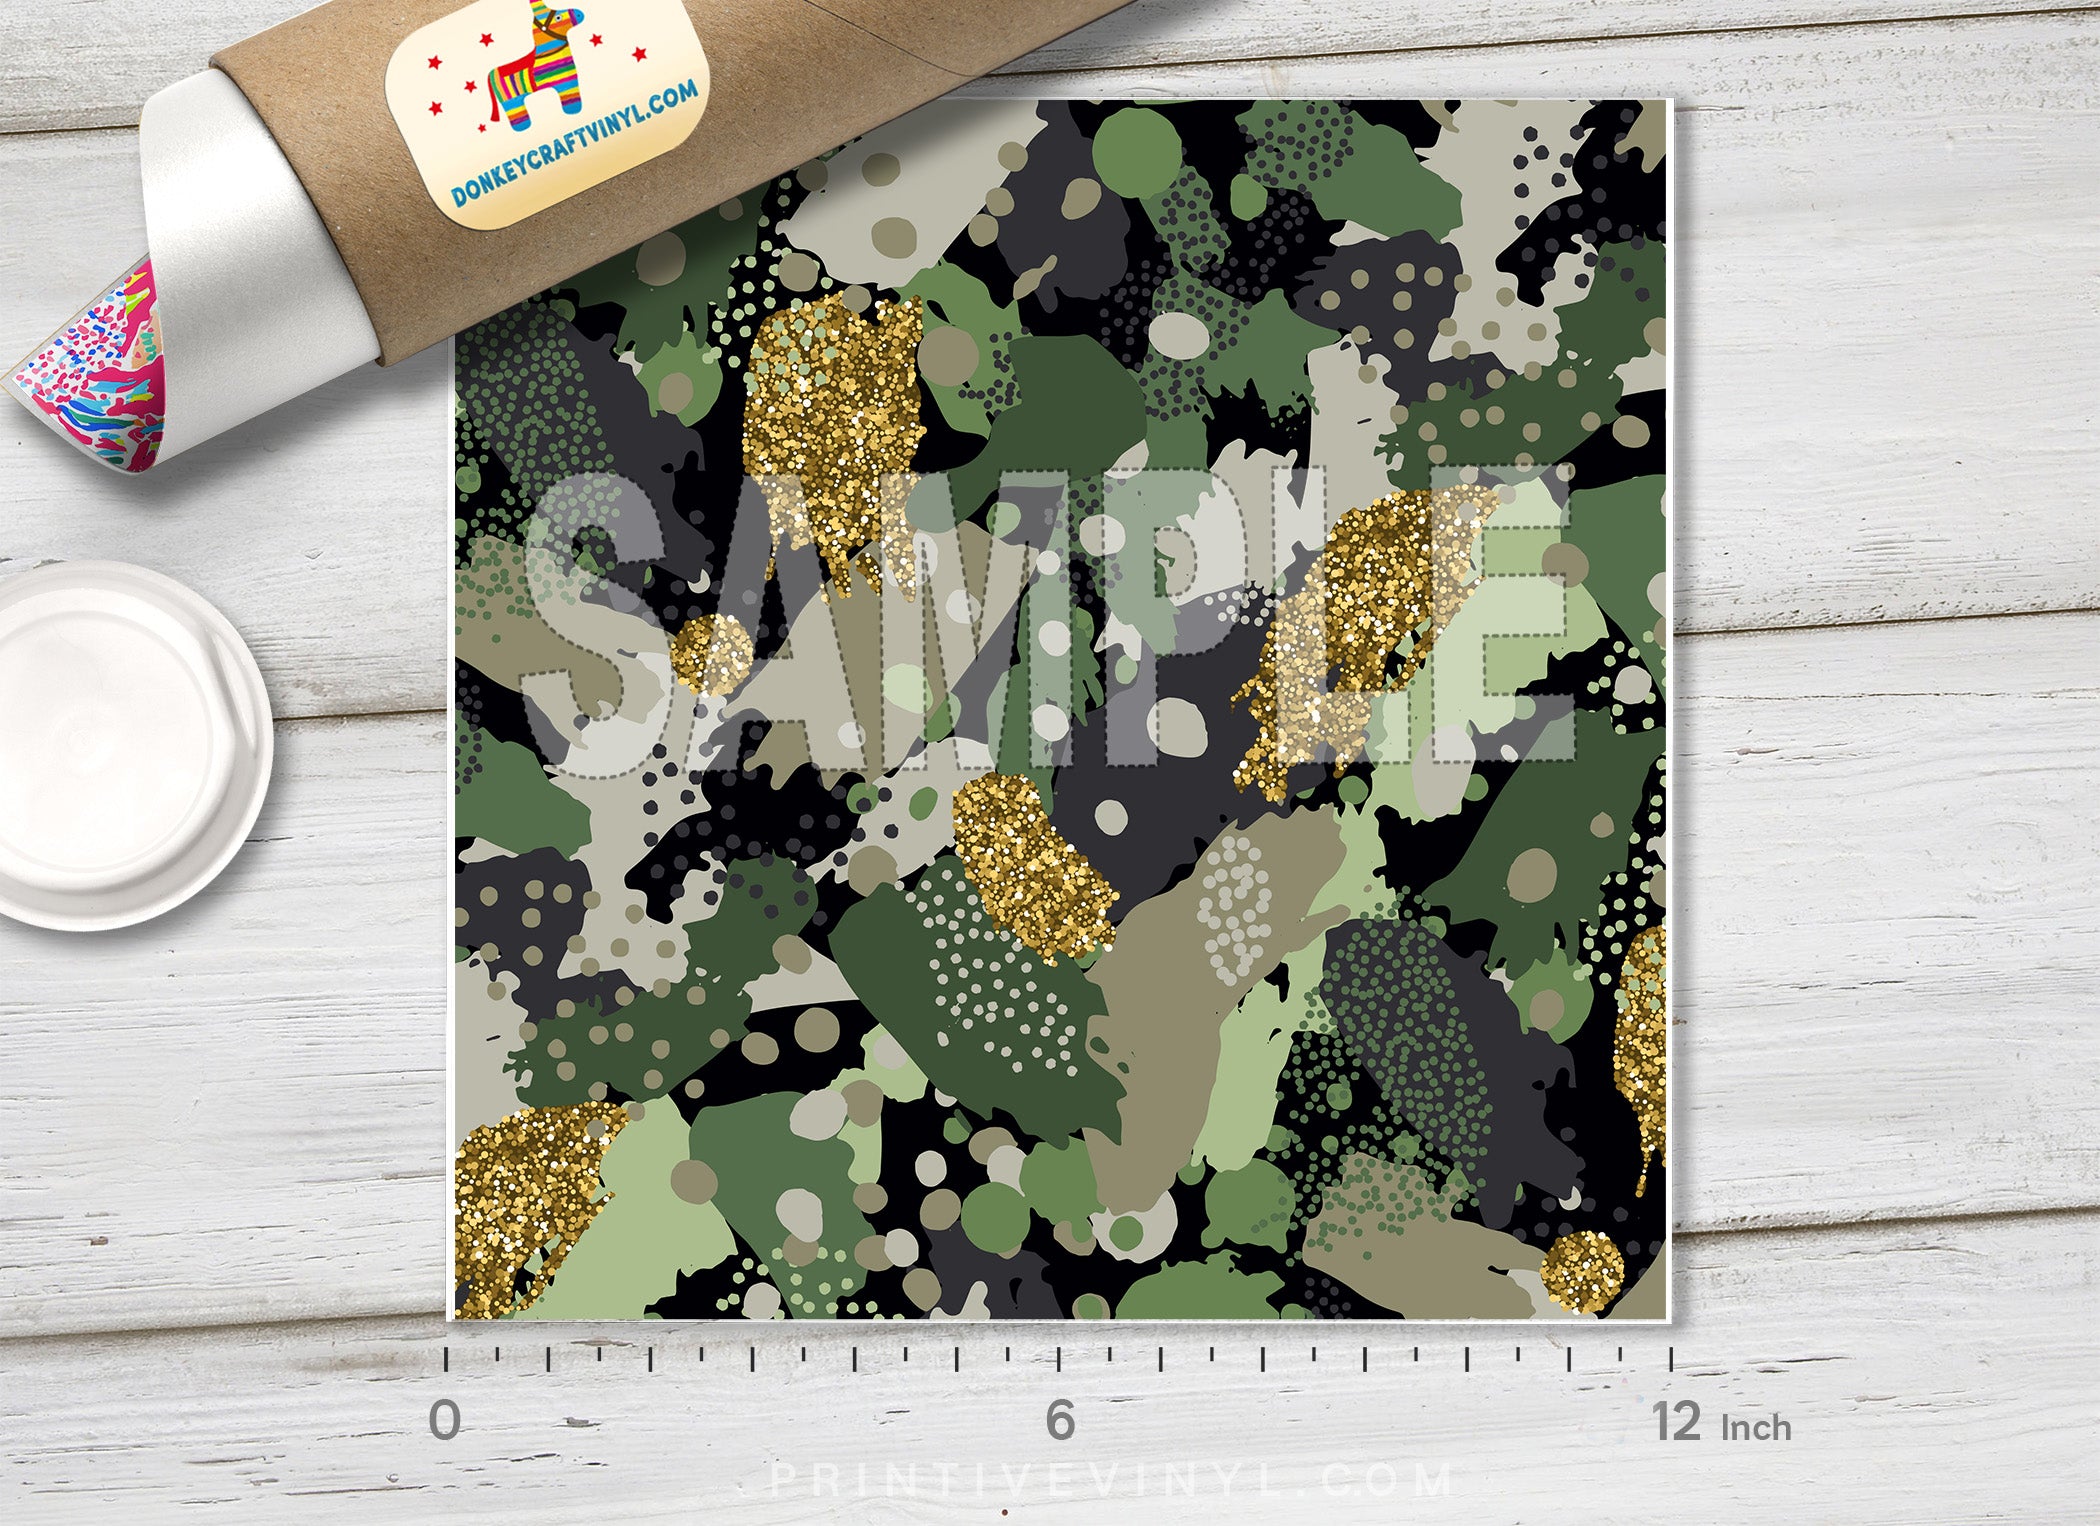 Camouflage Patterned Adhesive Vinyl 159